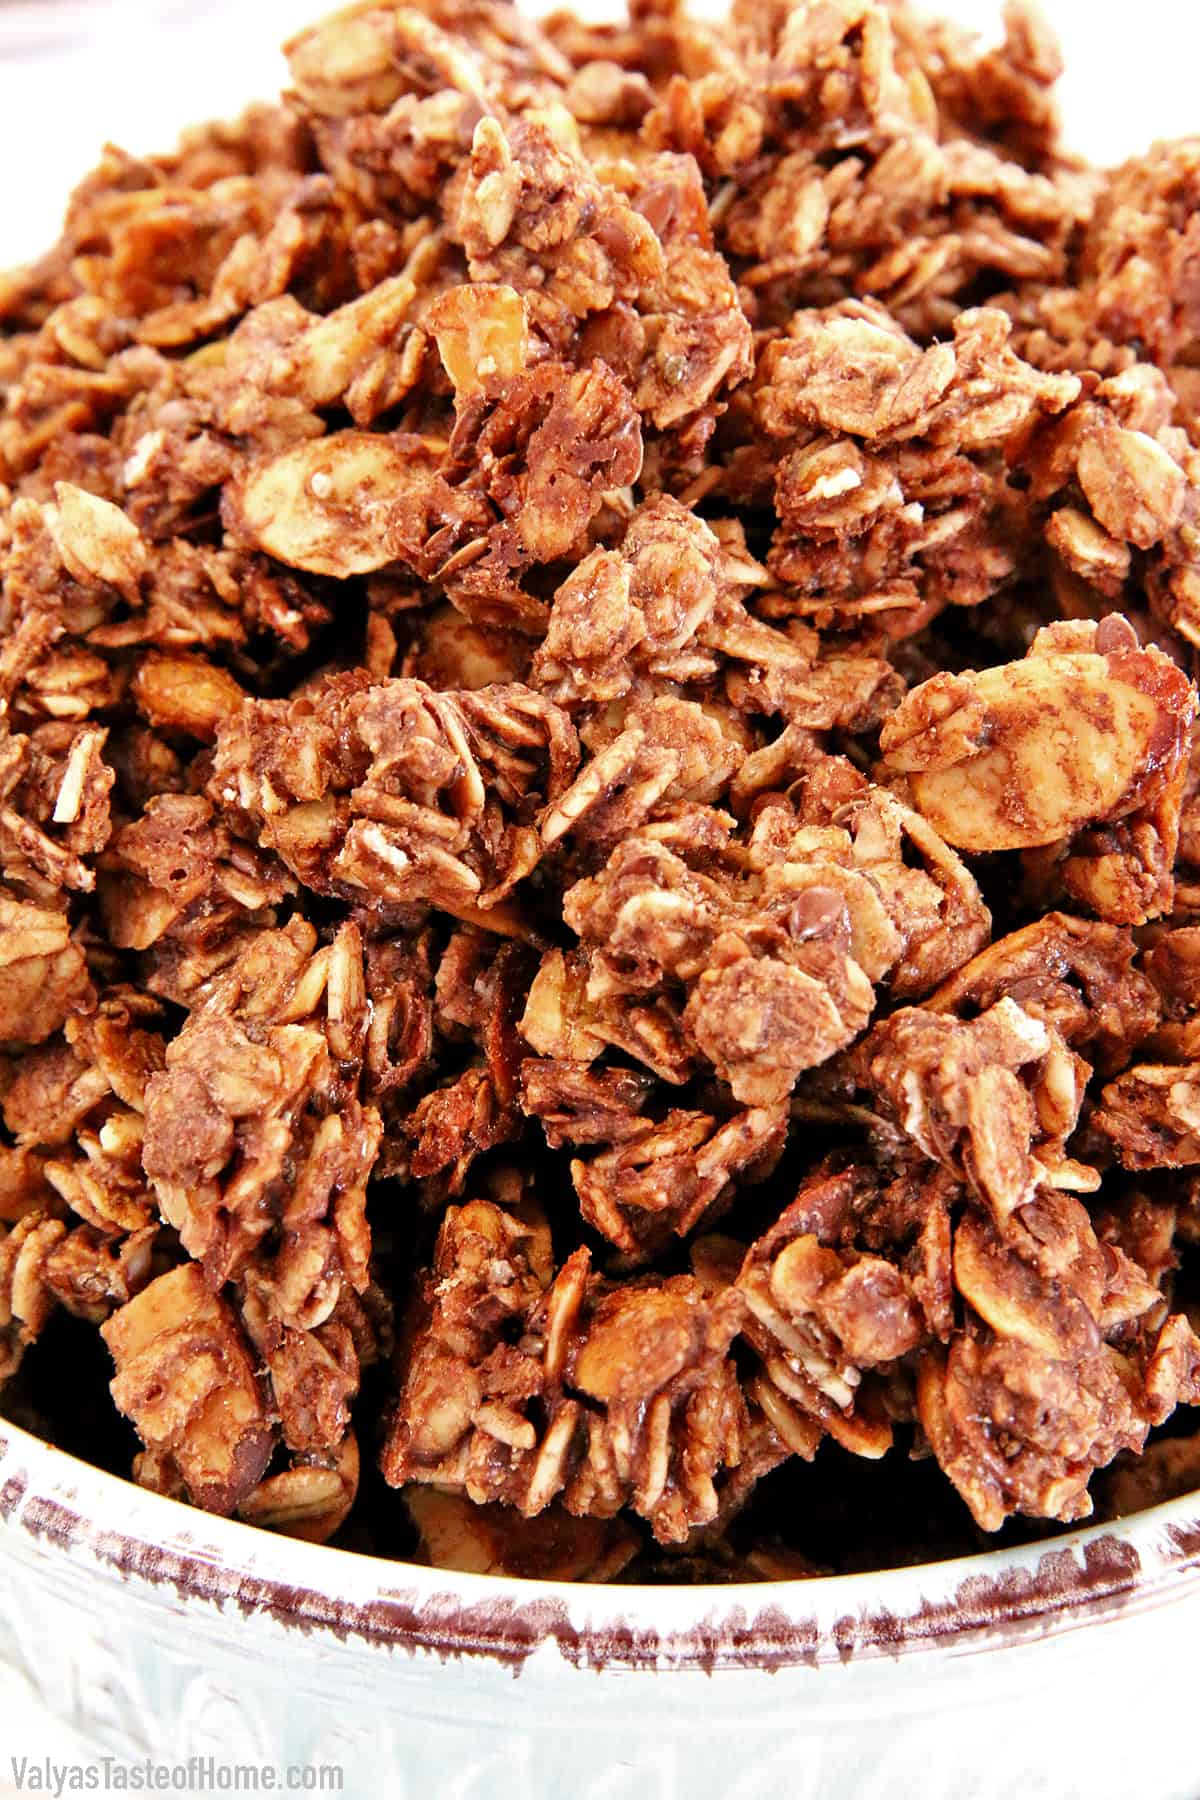 This granola crisps up nicely in the oven to give you a nice crispy and crunchy texture. It's also loaded with nuts and seeds, with delicious cacao powder for that chocolate flavor, but the best part is that it's not overly sweet.